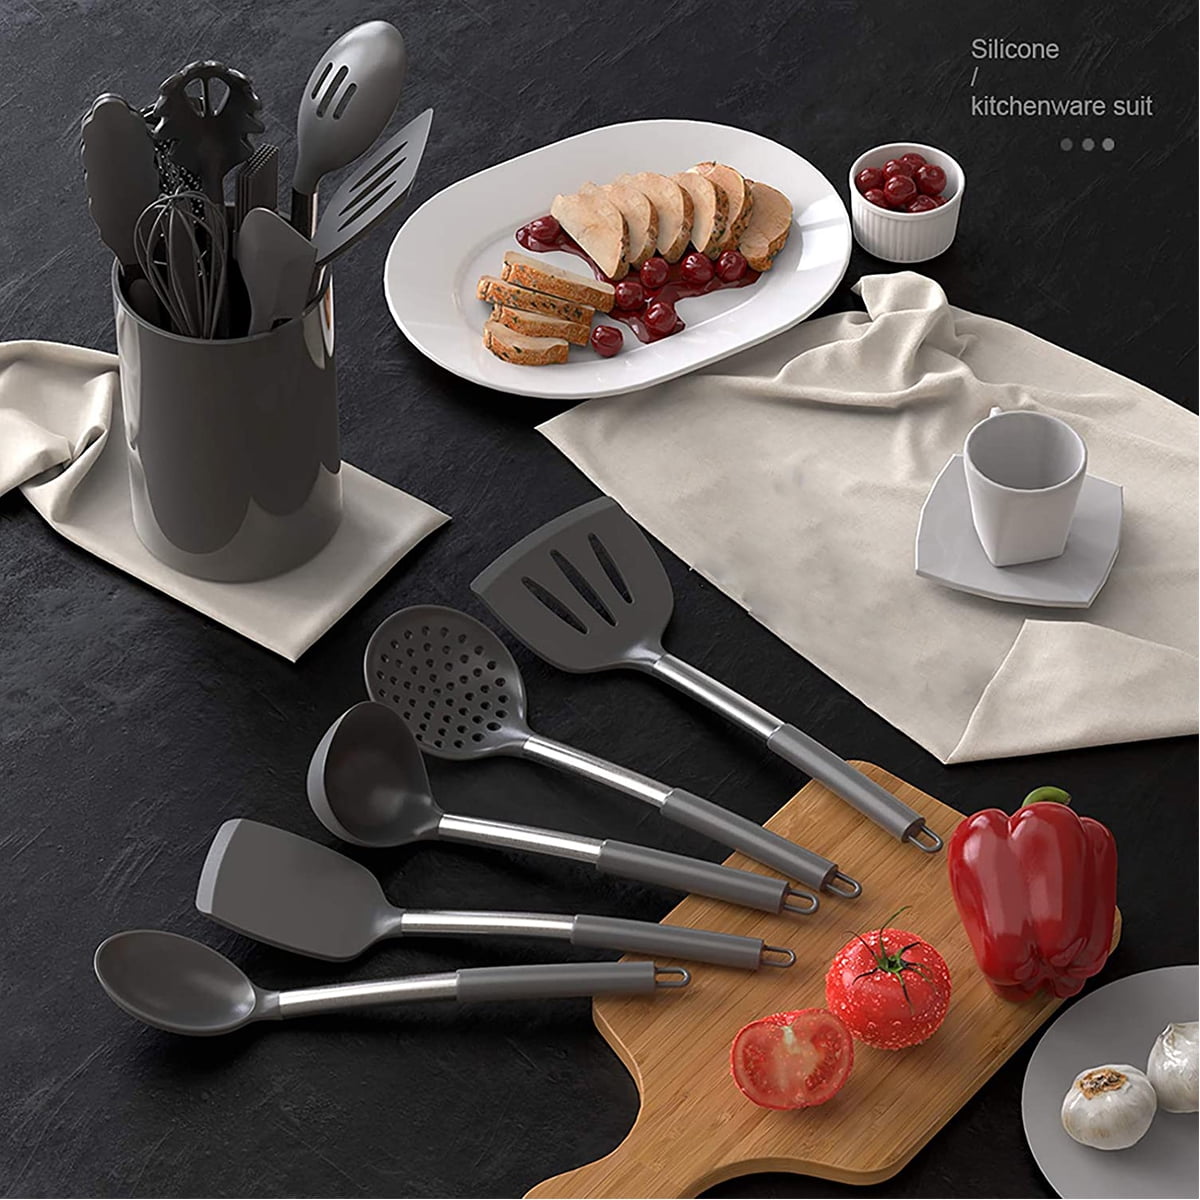 30 Pcs Silicone Cooking Utensil Set, Kitchen Utensils Cooking Utensils Set,  Food Grade Silicone Spatula Set, BPA-Free, Non-stick Heat Resistant Silicone  Cookware with Strong Stainless Steel Handle 